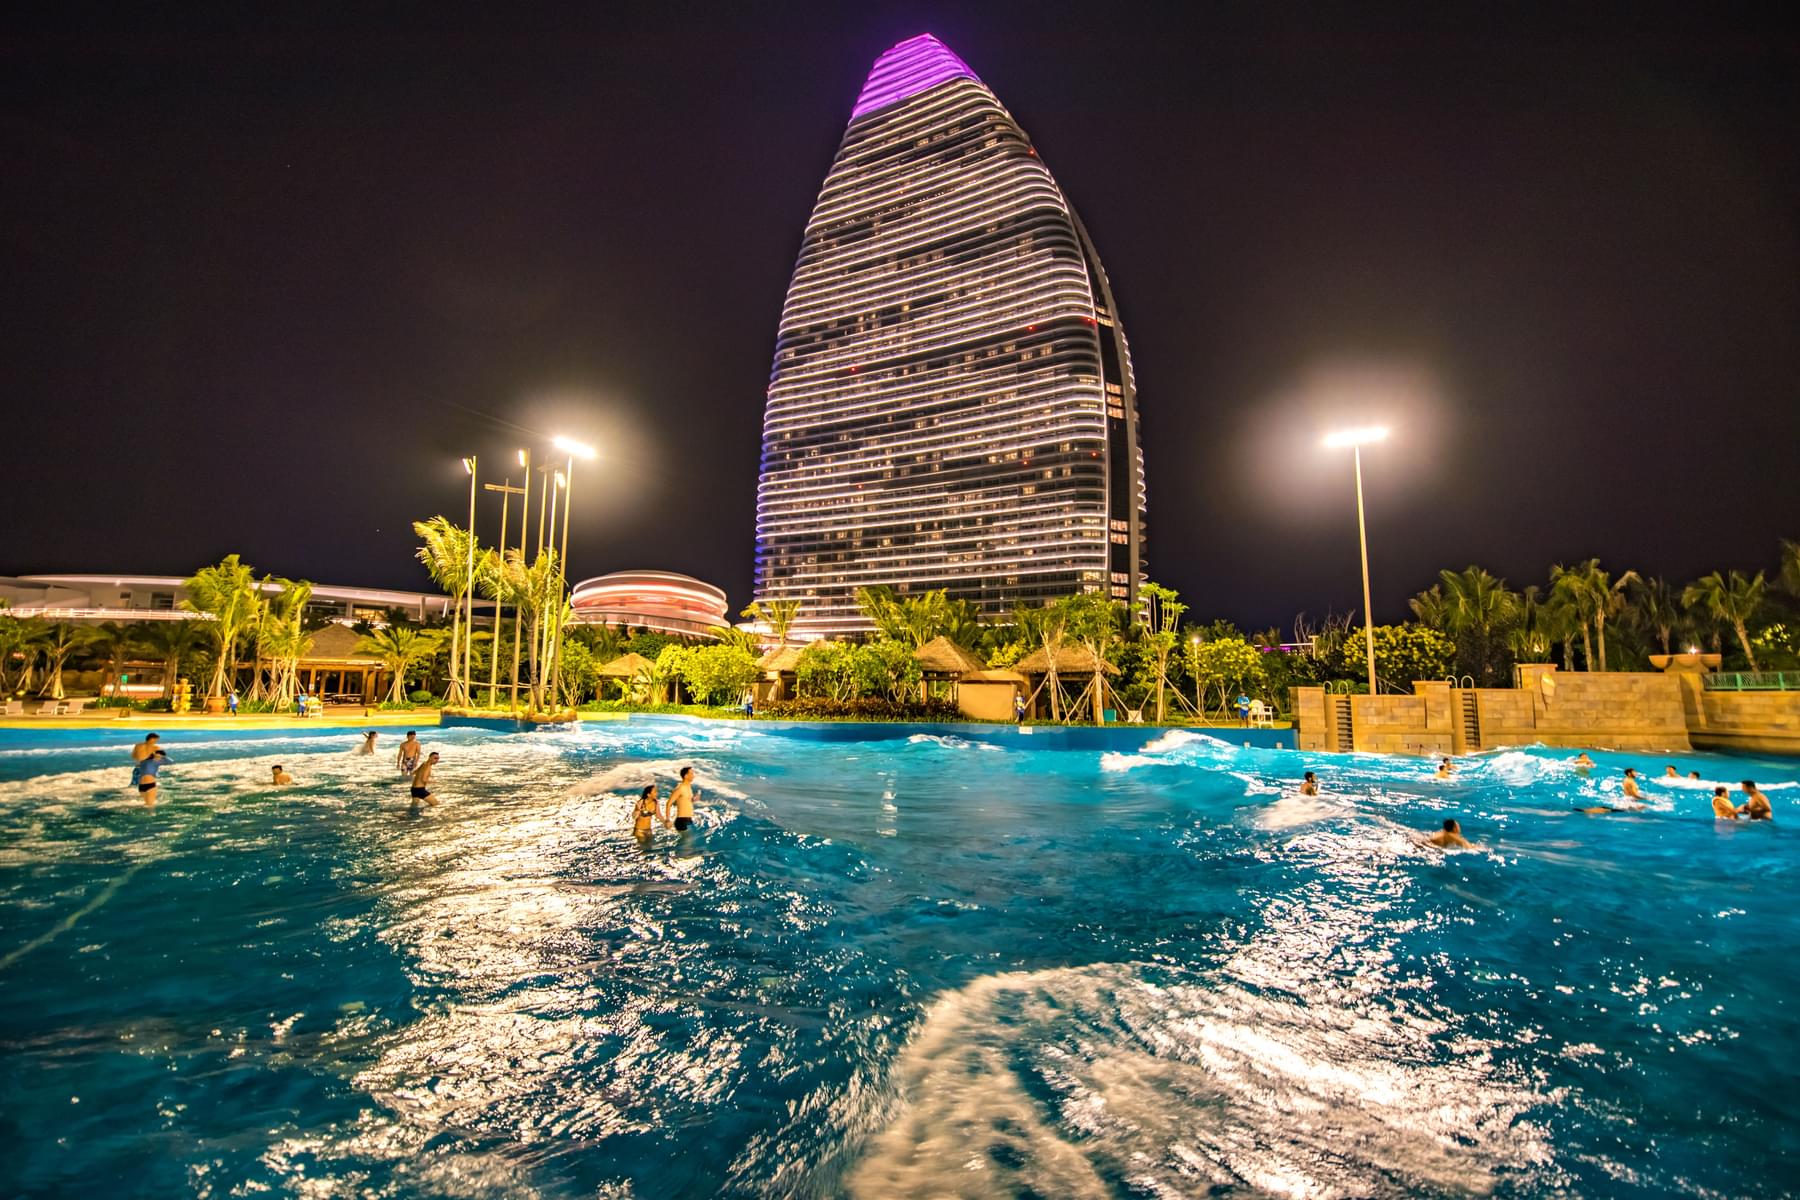 Why should you book wild wadi water park tickets?